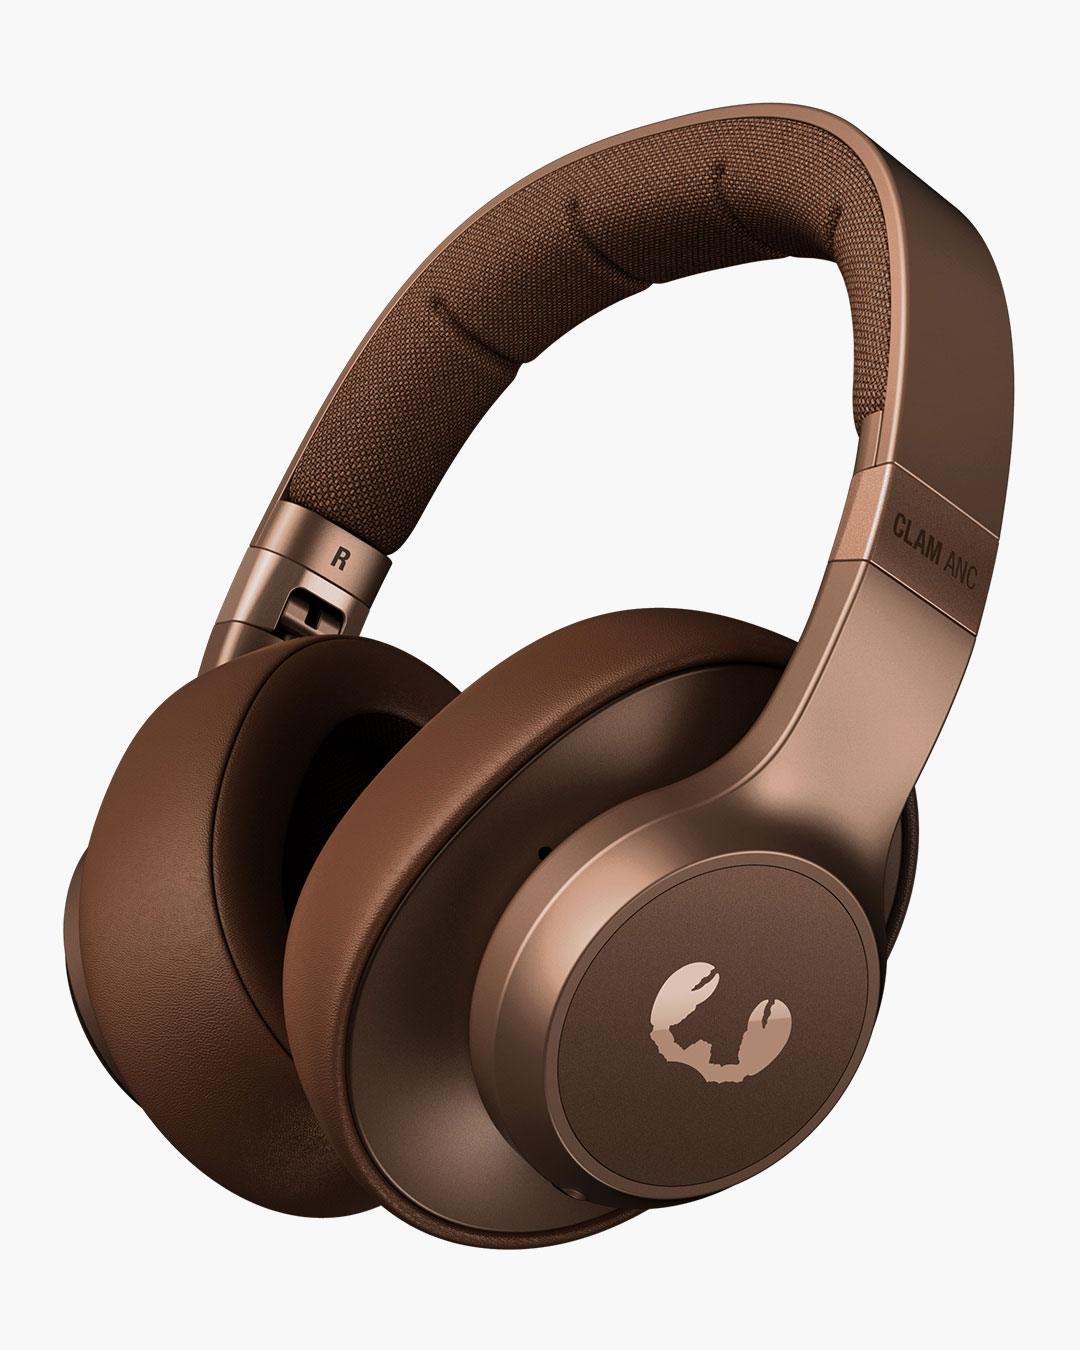 Fresh 'n Rebel - Clam ANC - Wireless over-ear headphones with active noise cancelling - Brave Bronze